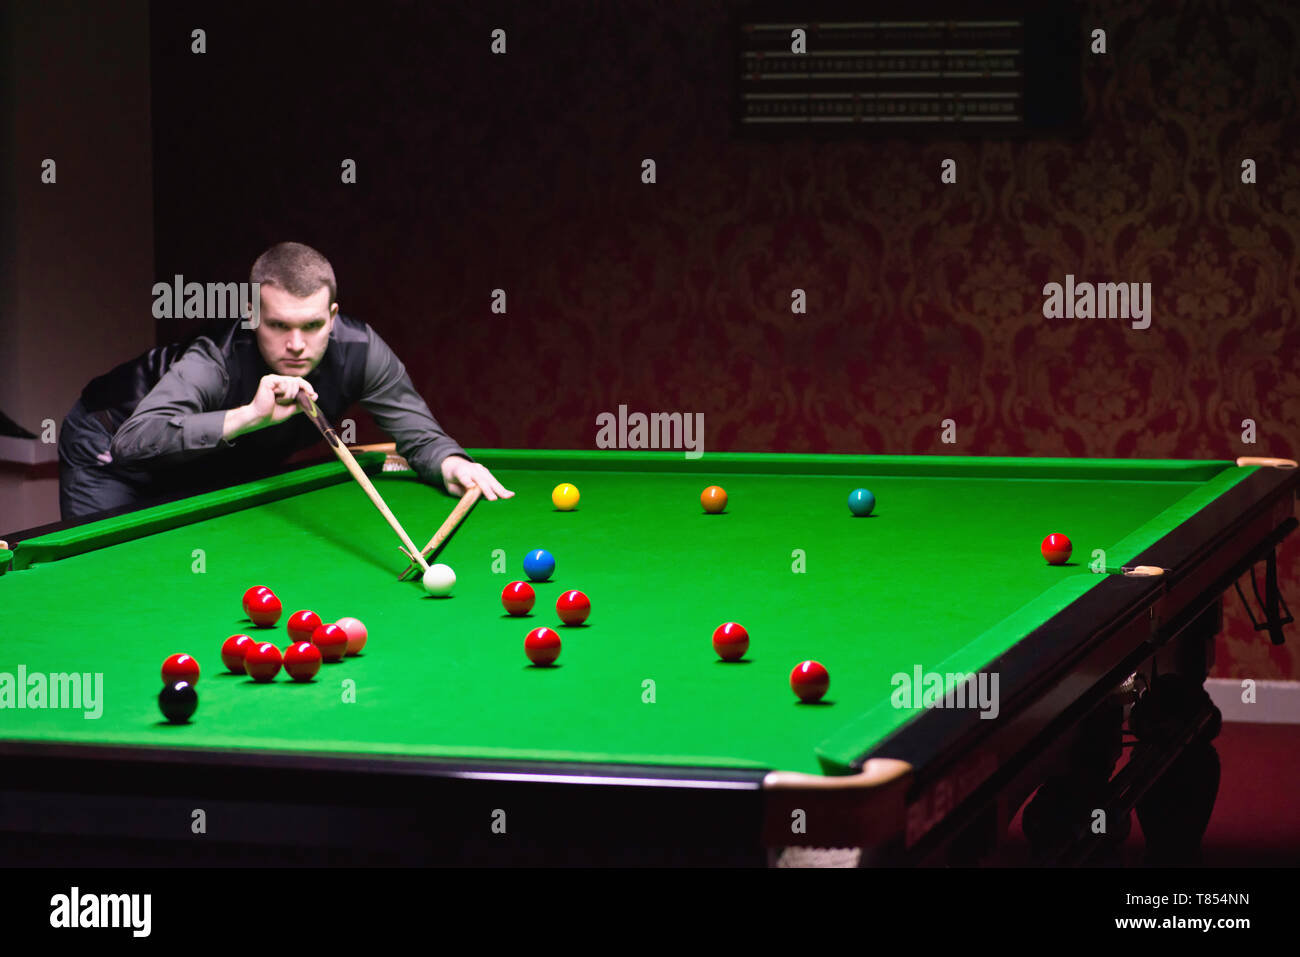 Snooker player taking a shot Stock Photo